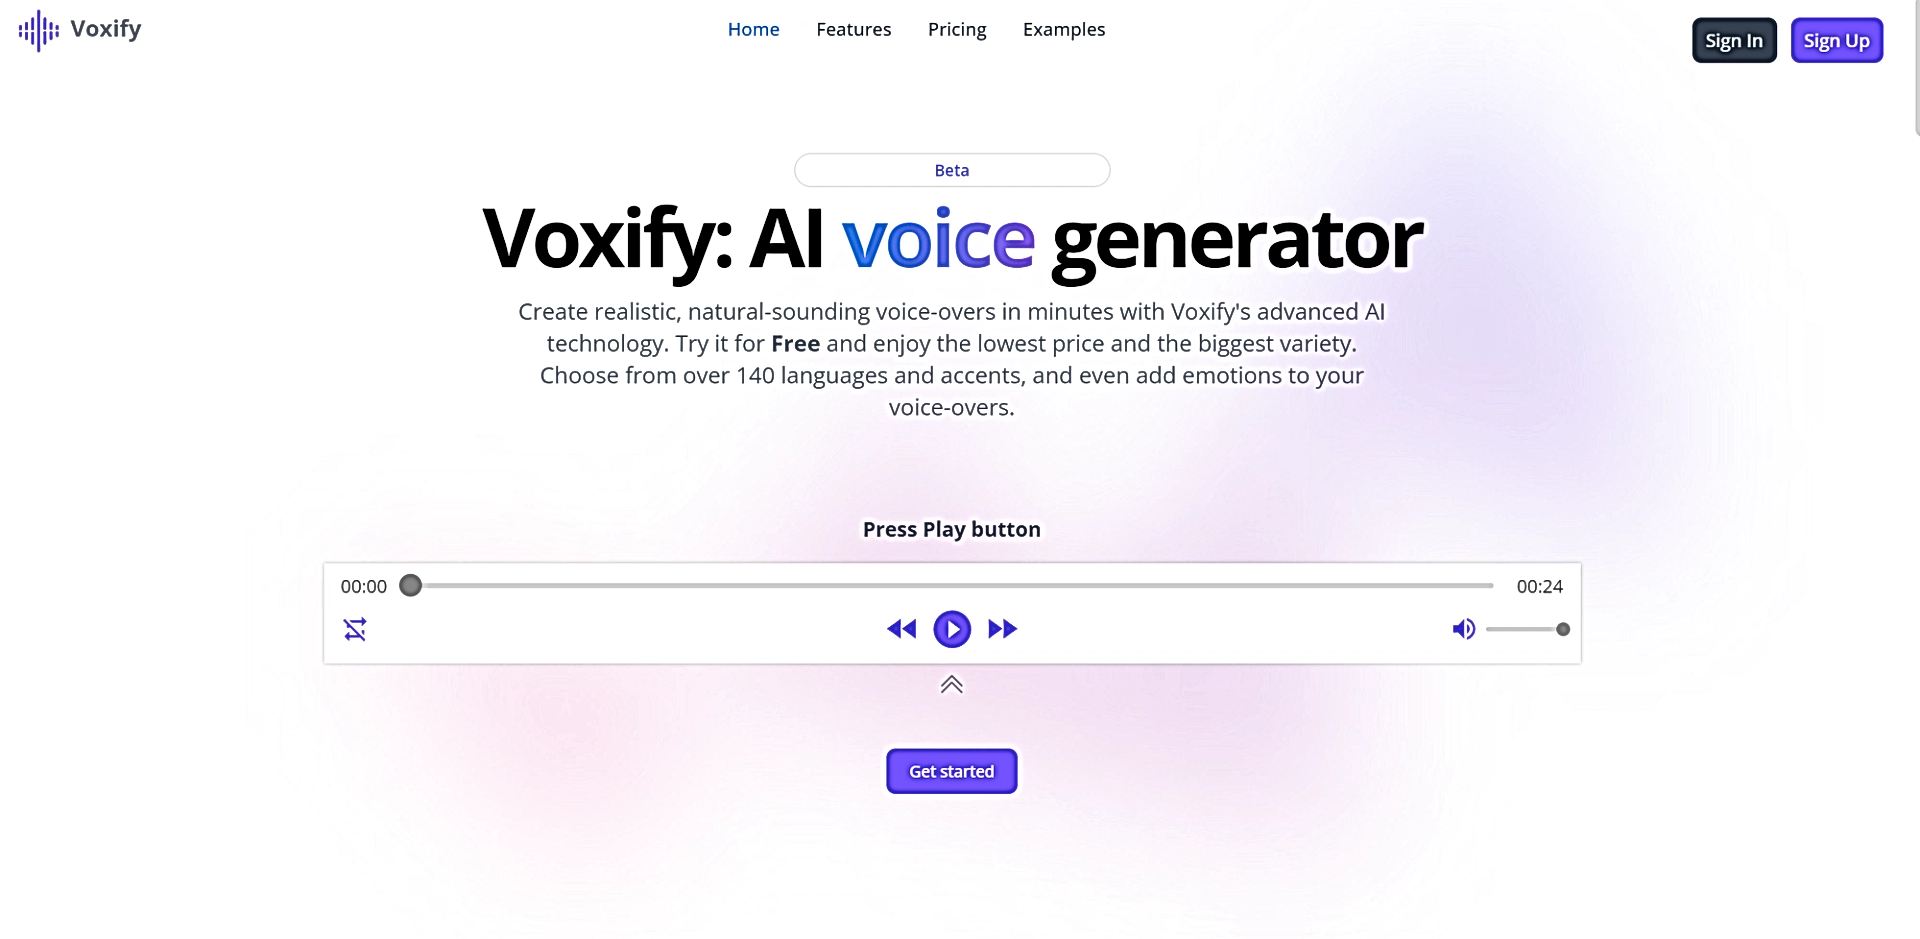 Voxify featured